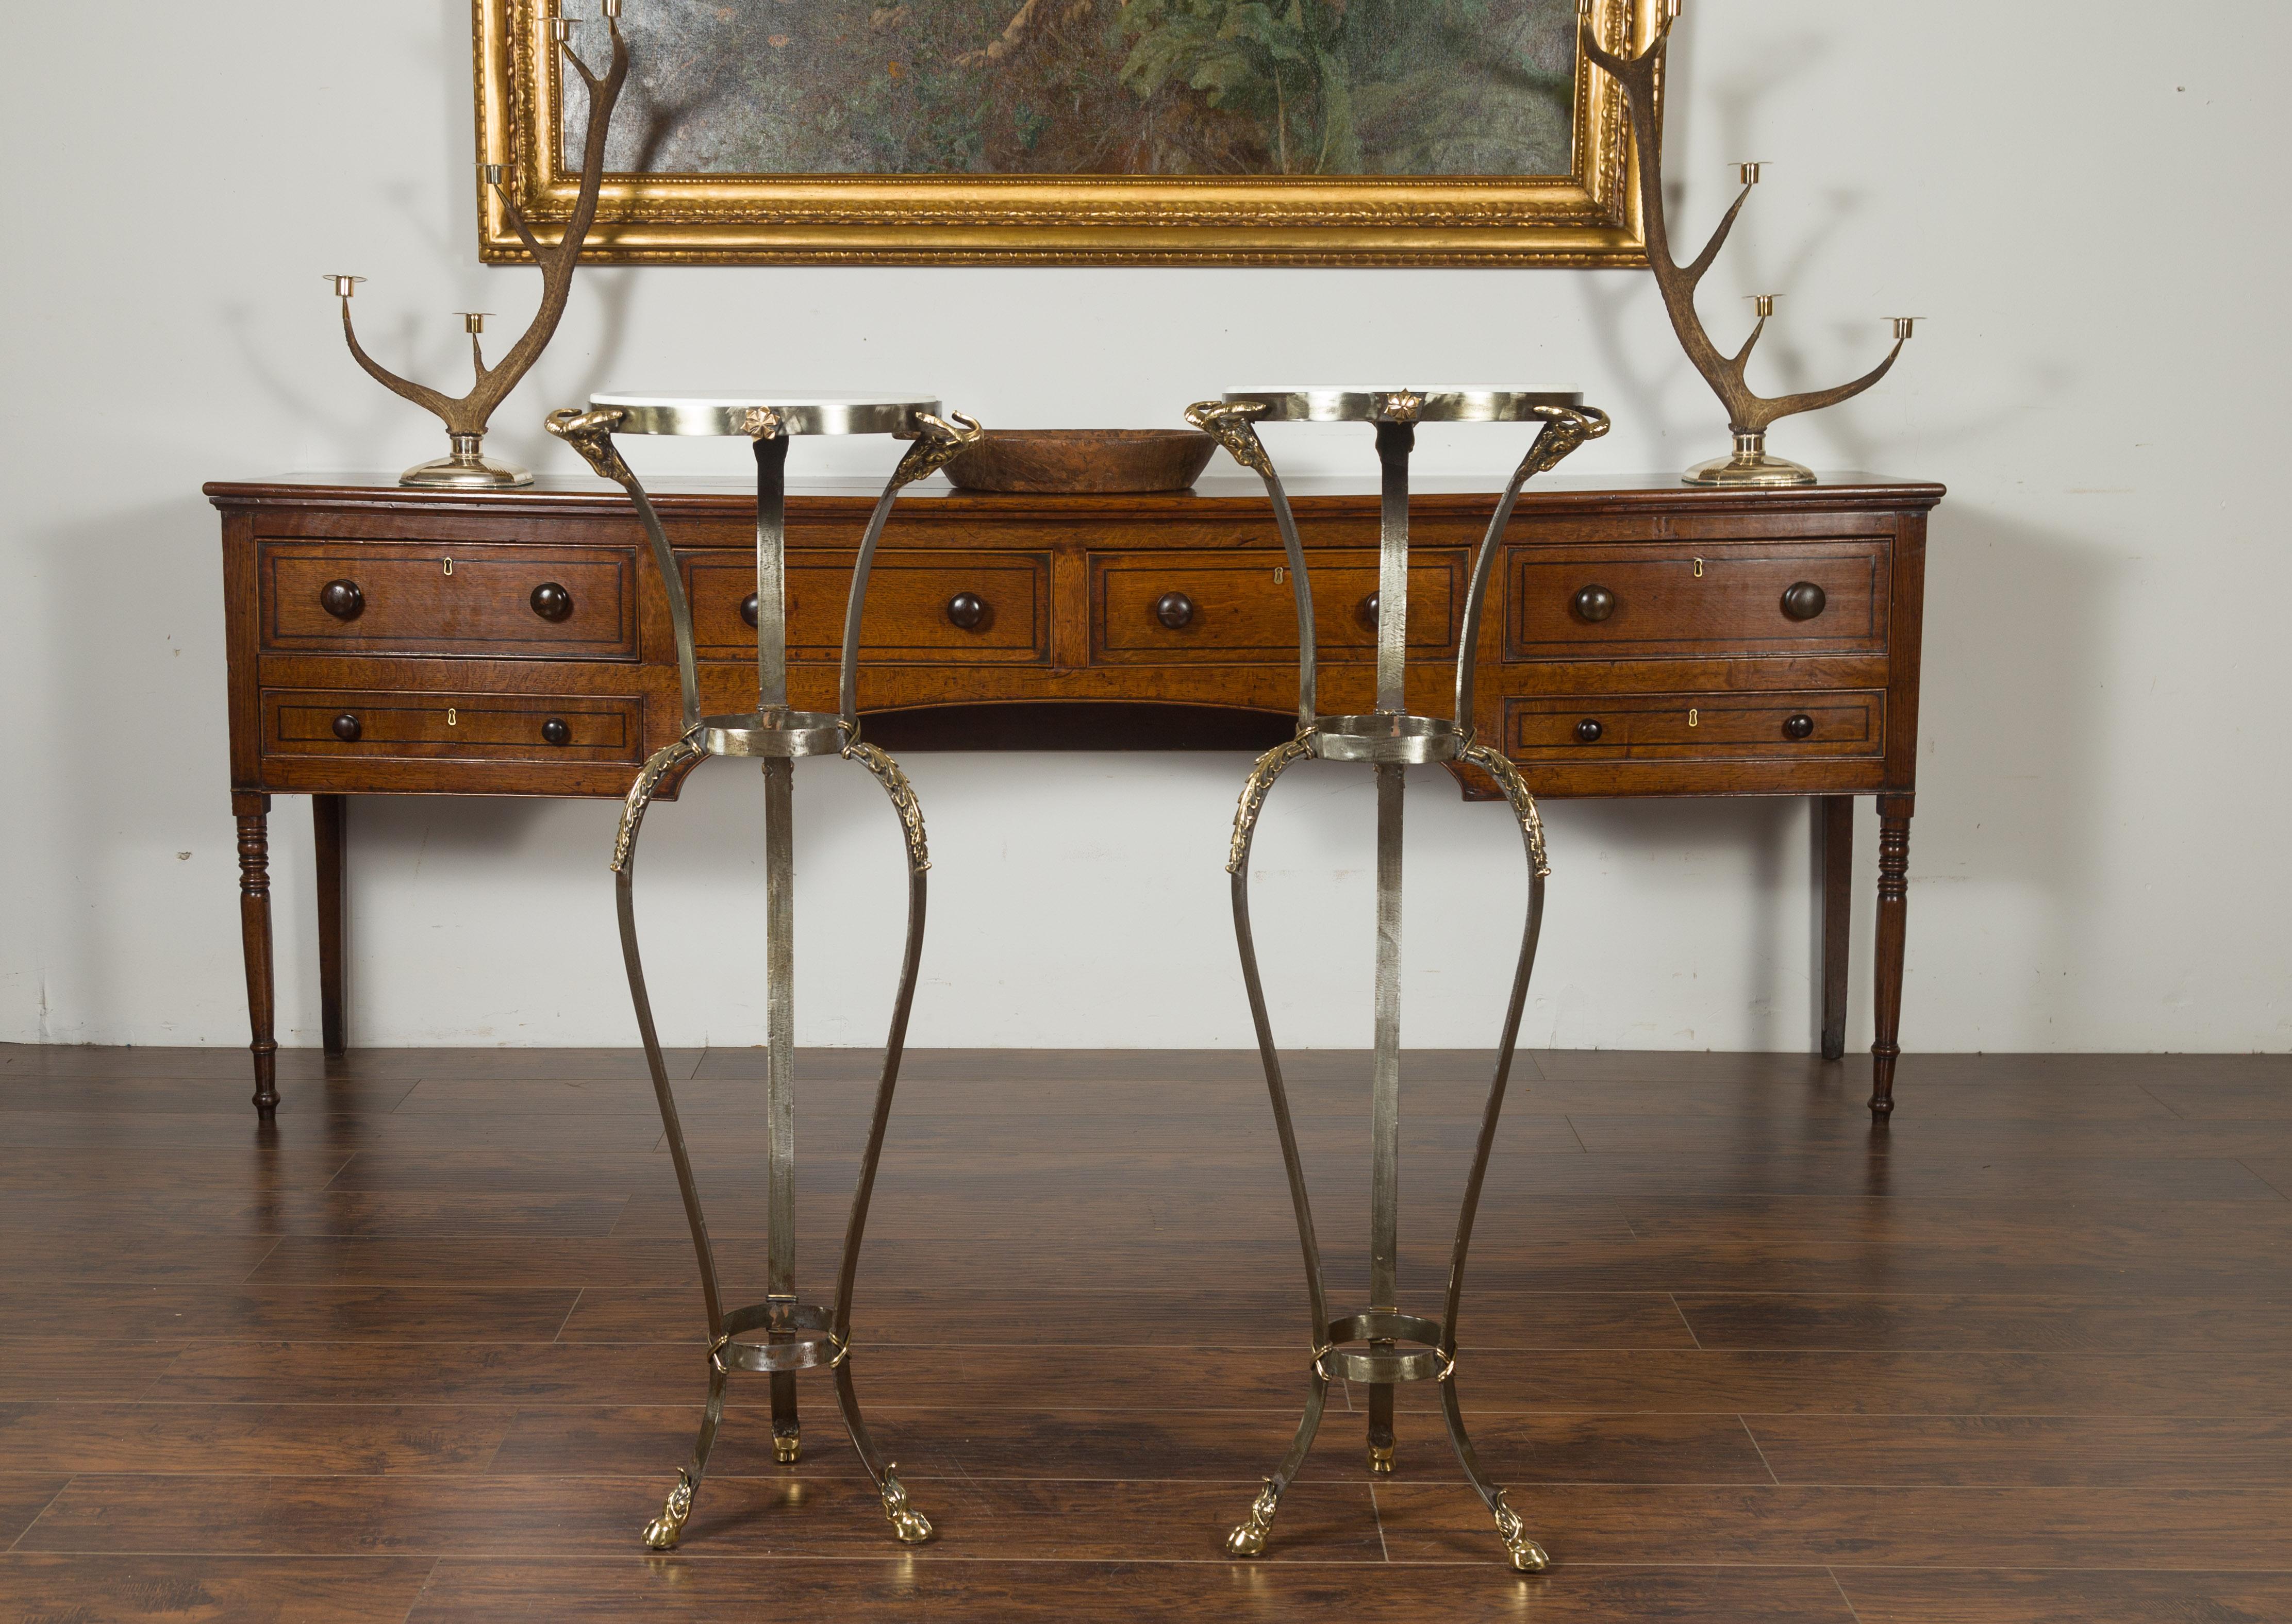 Pair of Italian Steel and Brass Pedestals with Marble Tops and Ram's Heads In Good Condition For Sale In Atlanta, GA